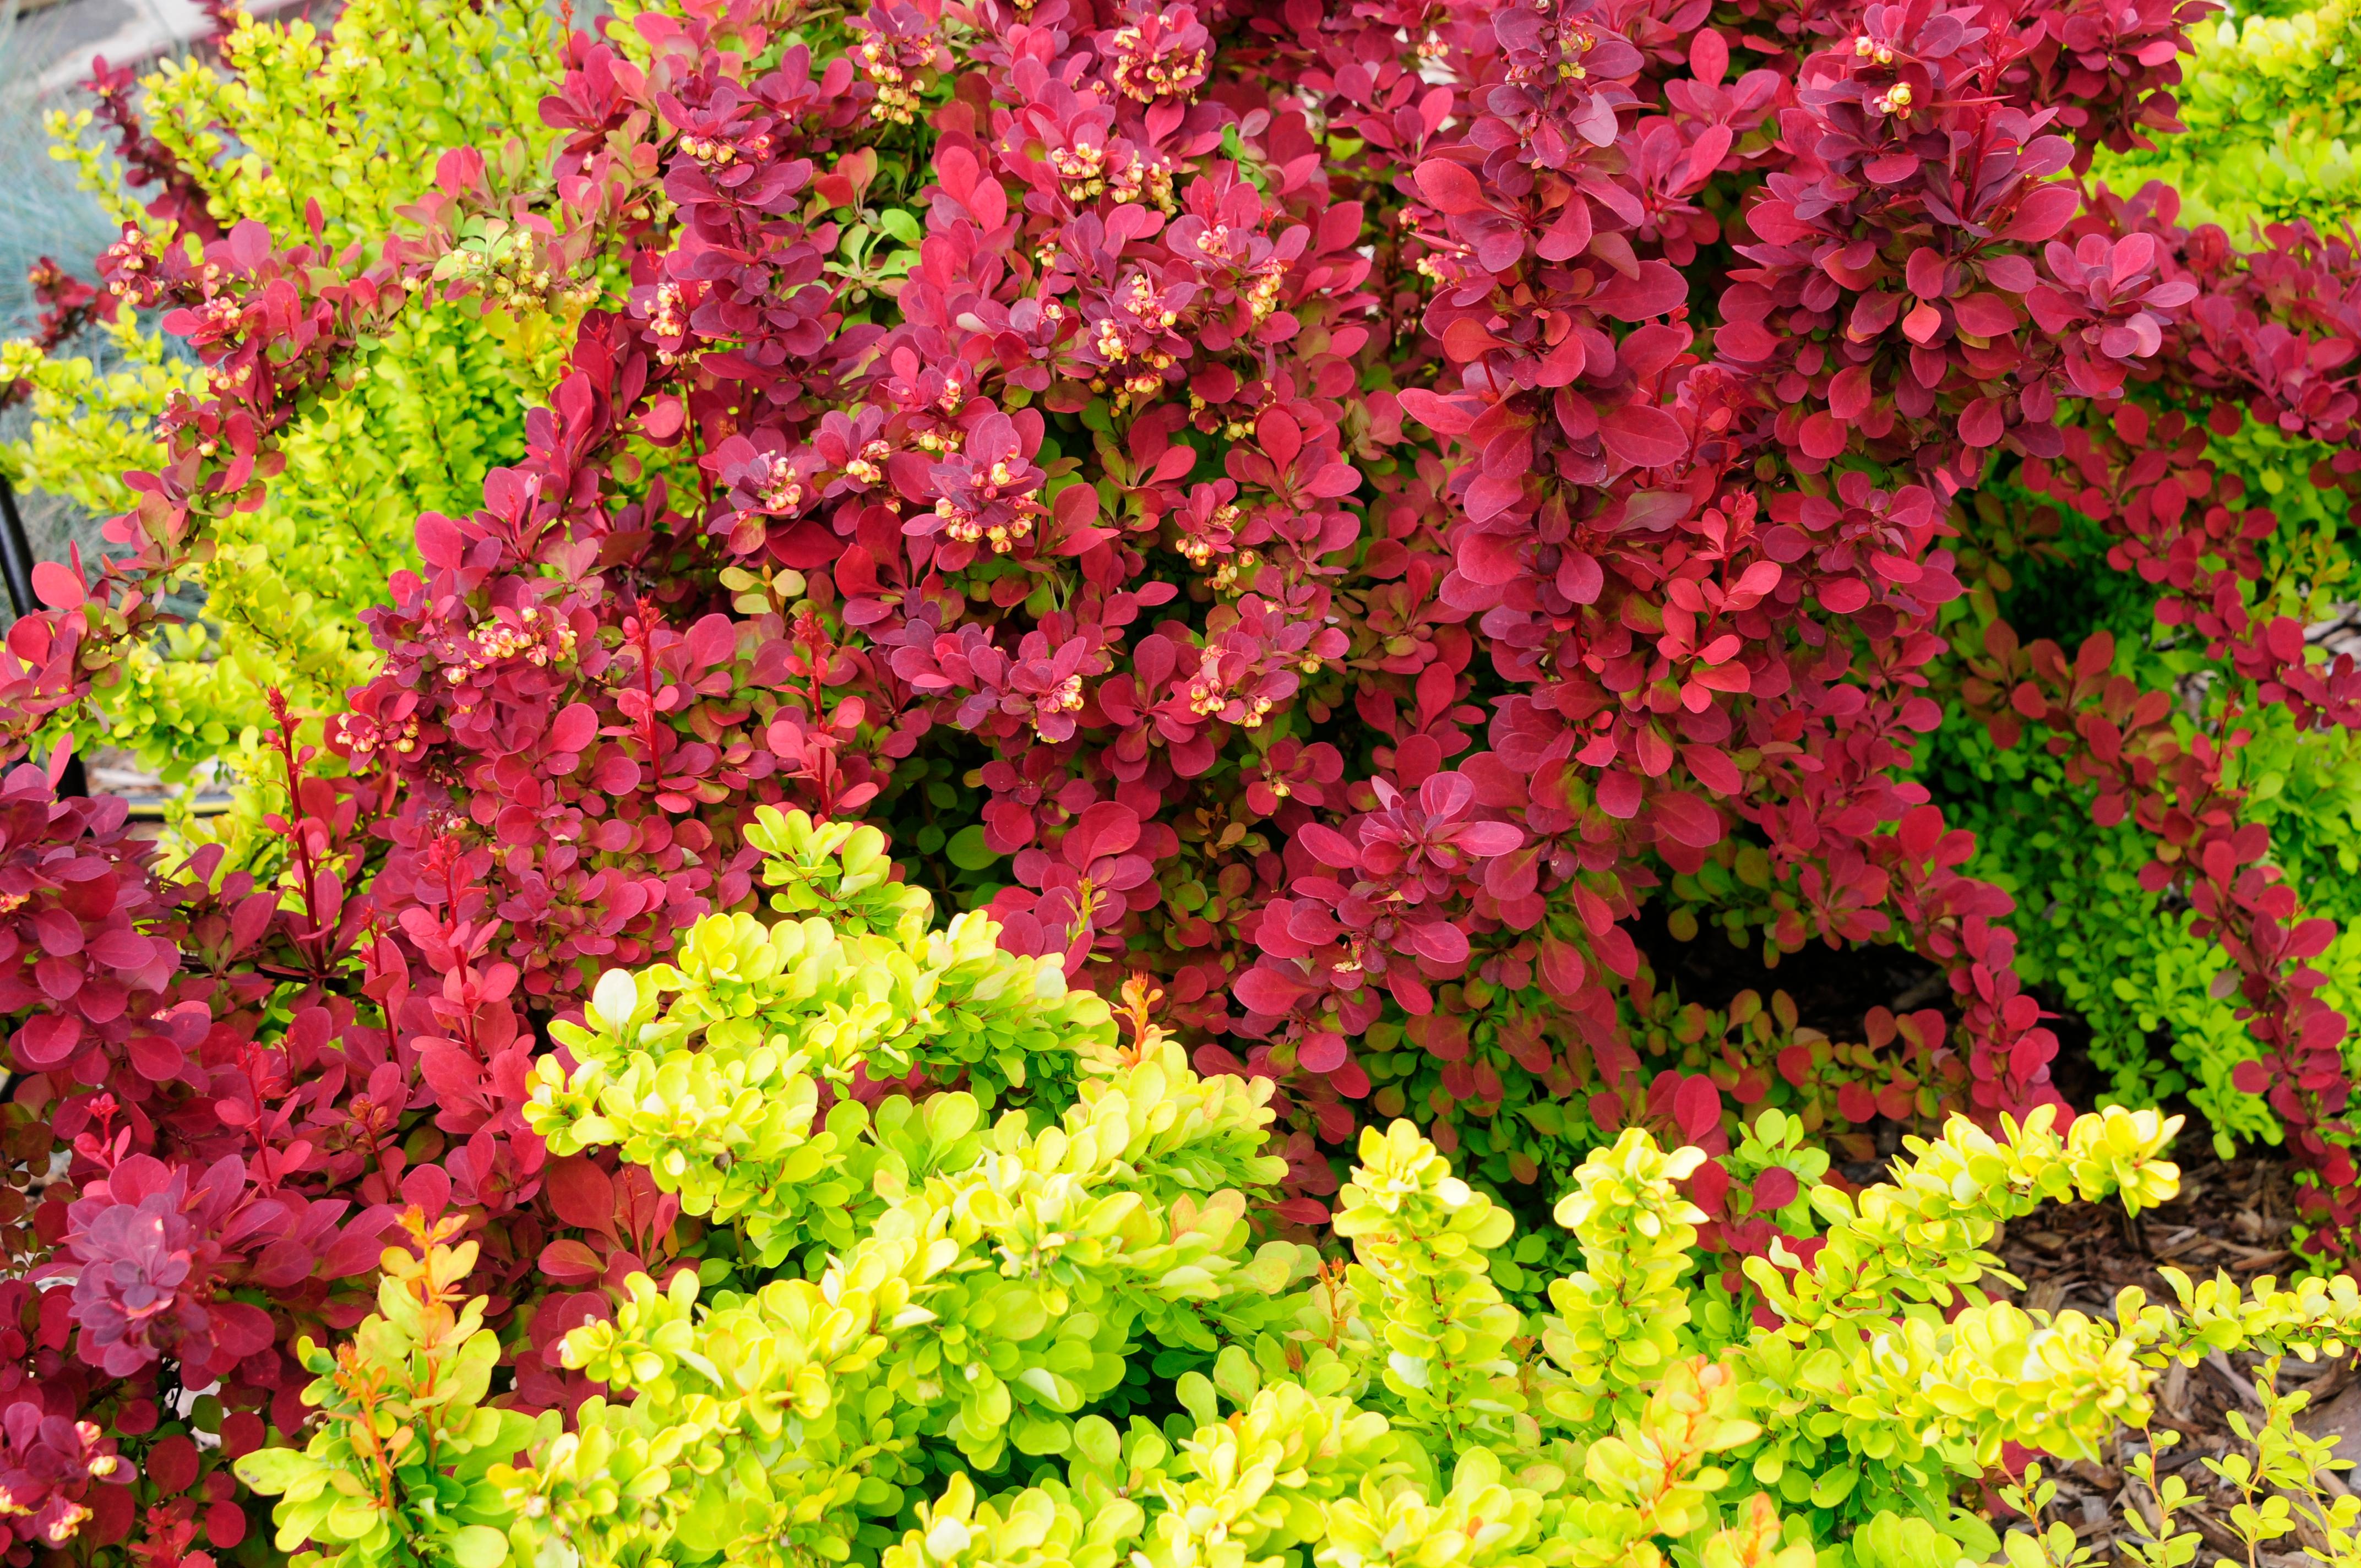 Japanese Barberry, complementary colors. Orange Rocket and Golden Rocket.